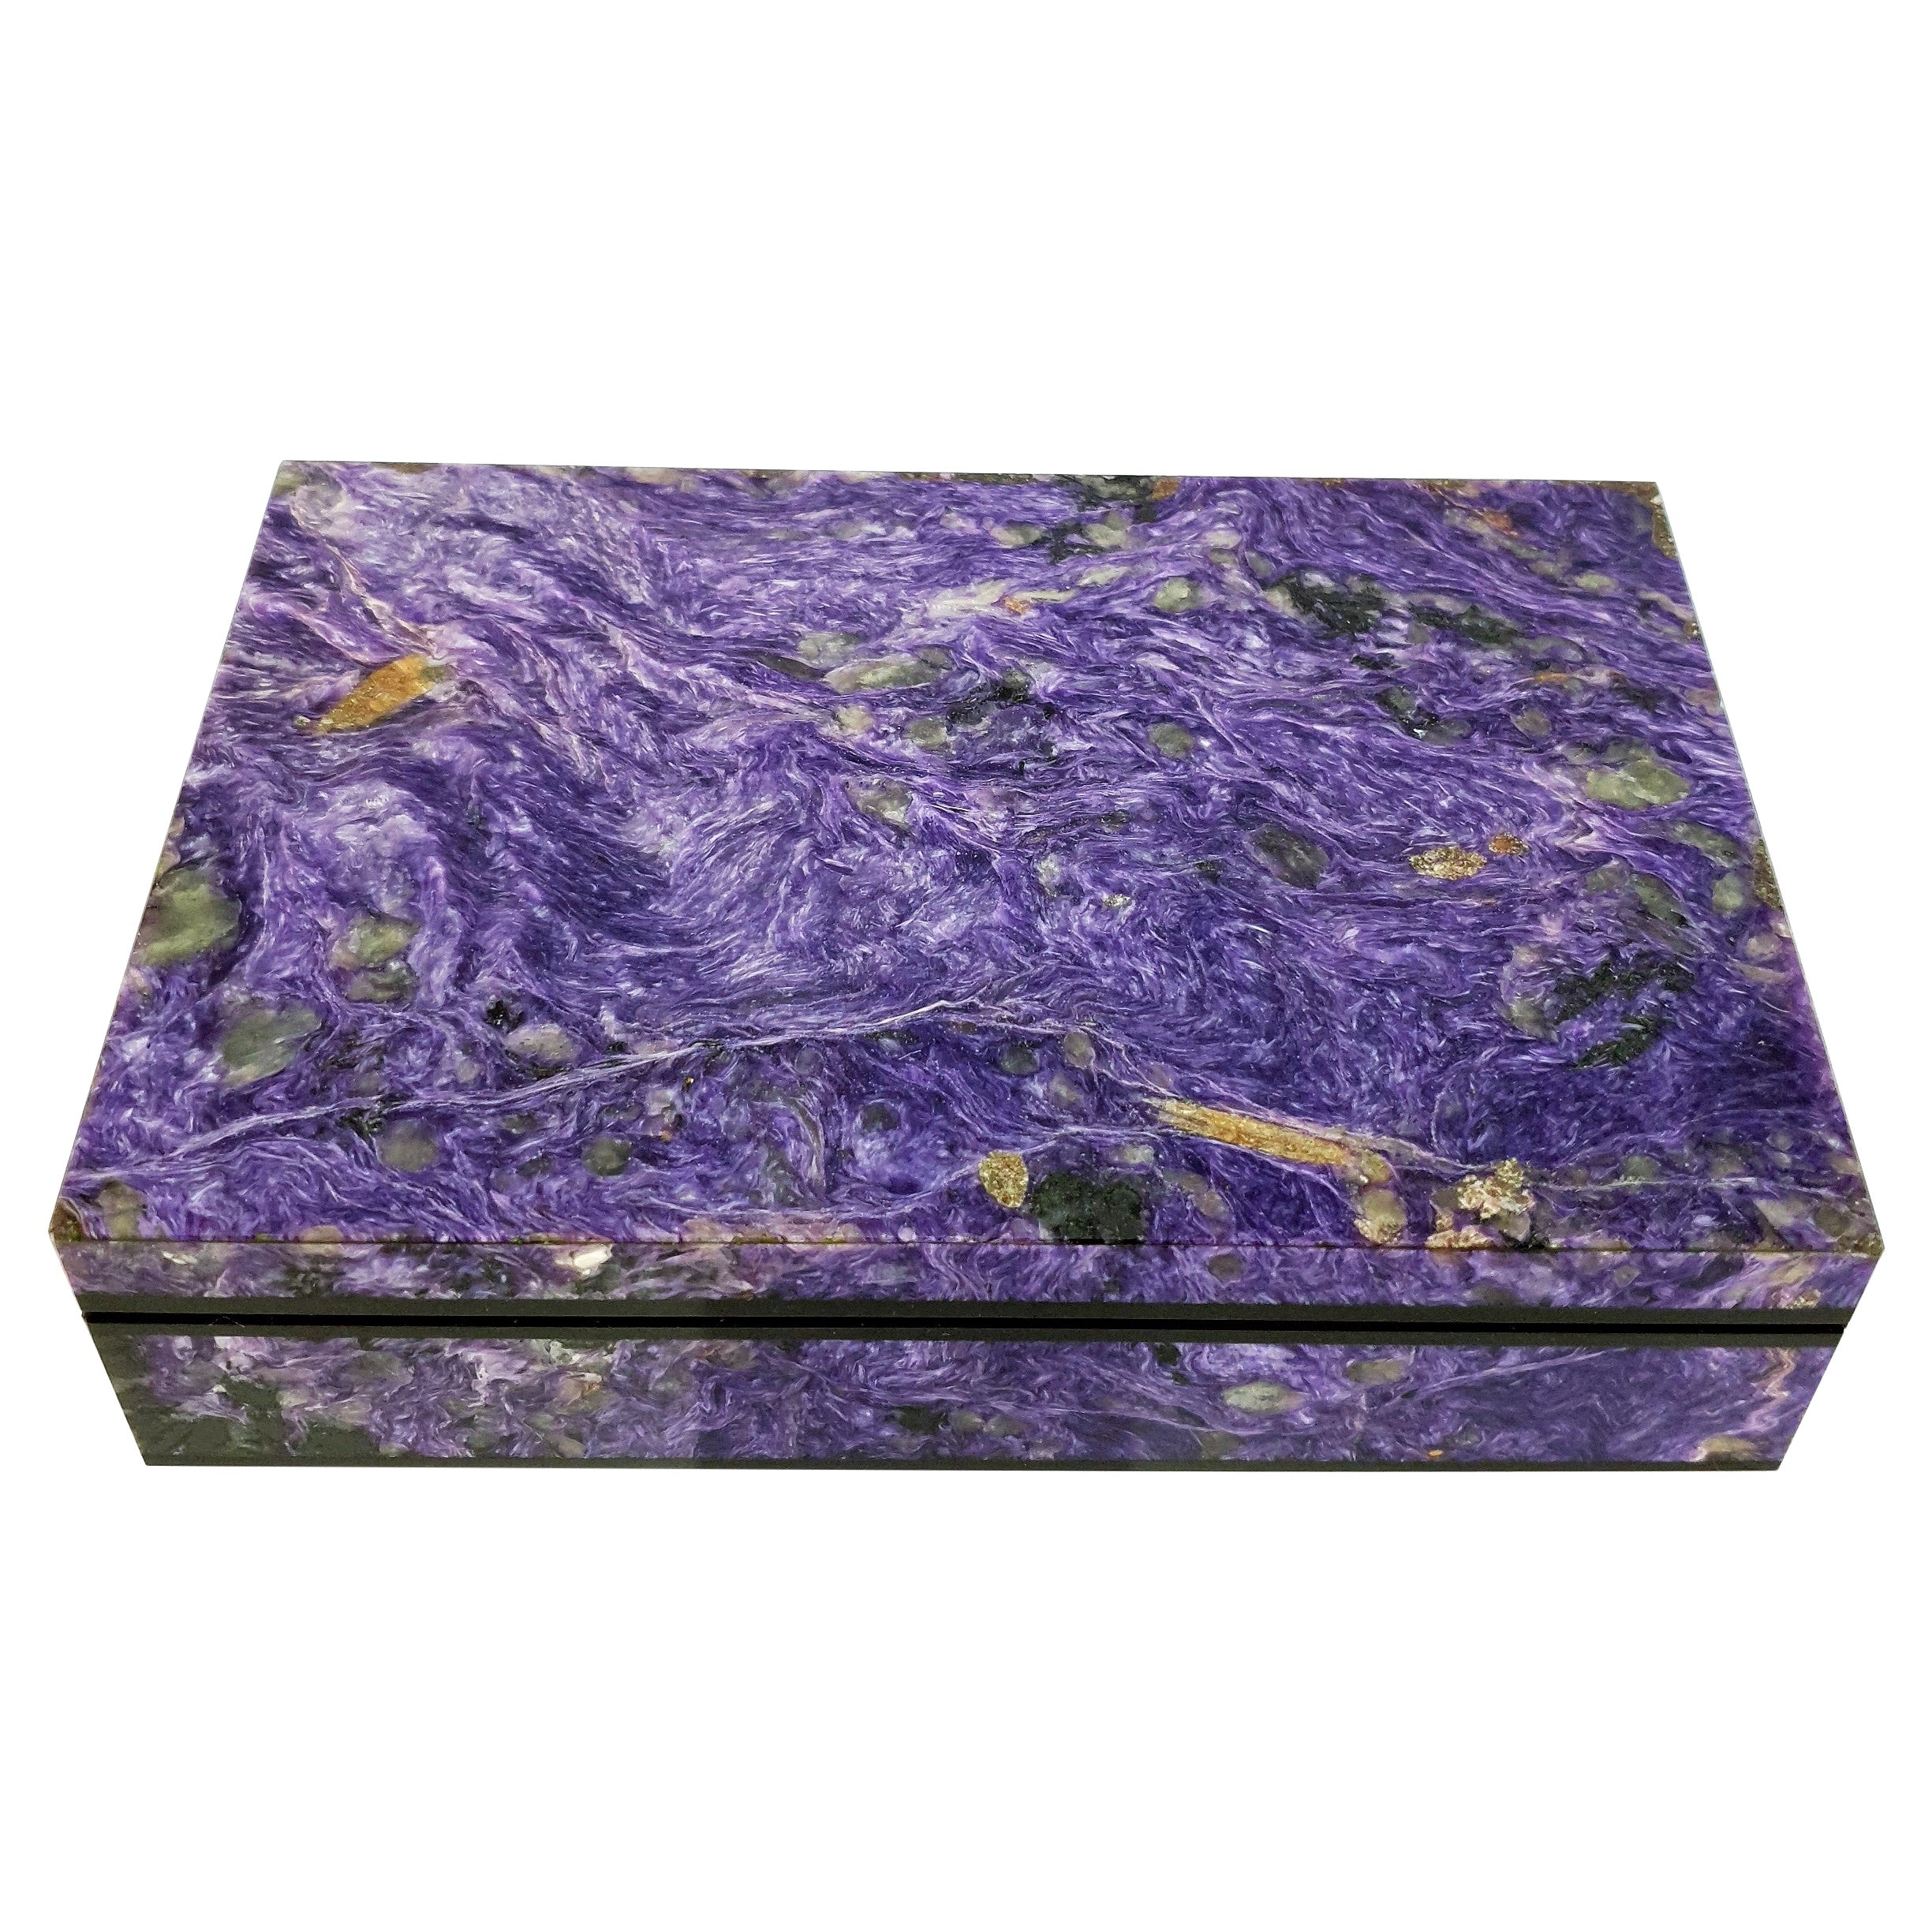 Purple Charoite Decorative Jewelry Gemstone Box with Black Marble Inlay For Sale